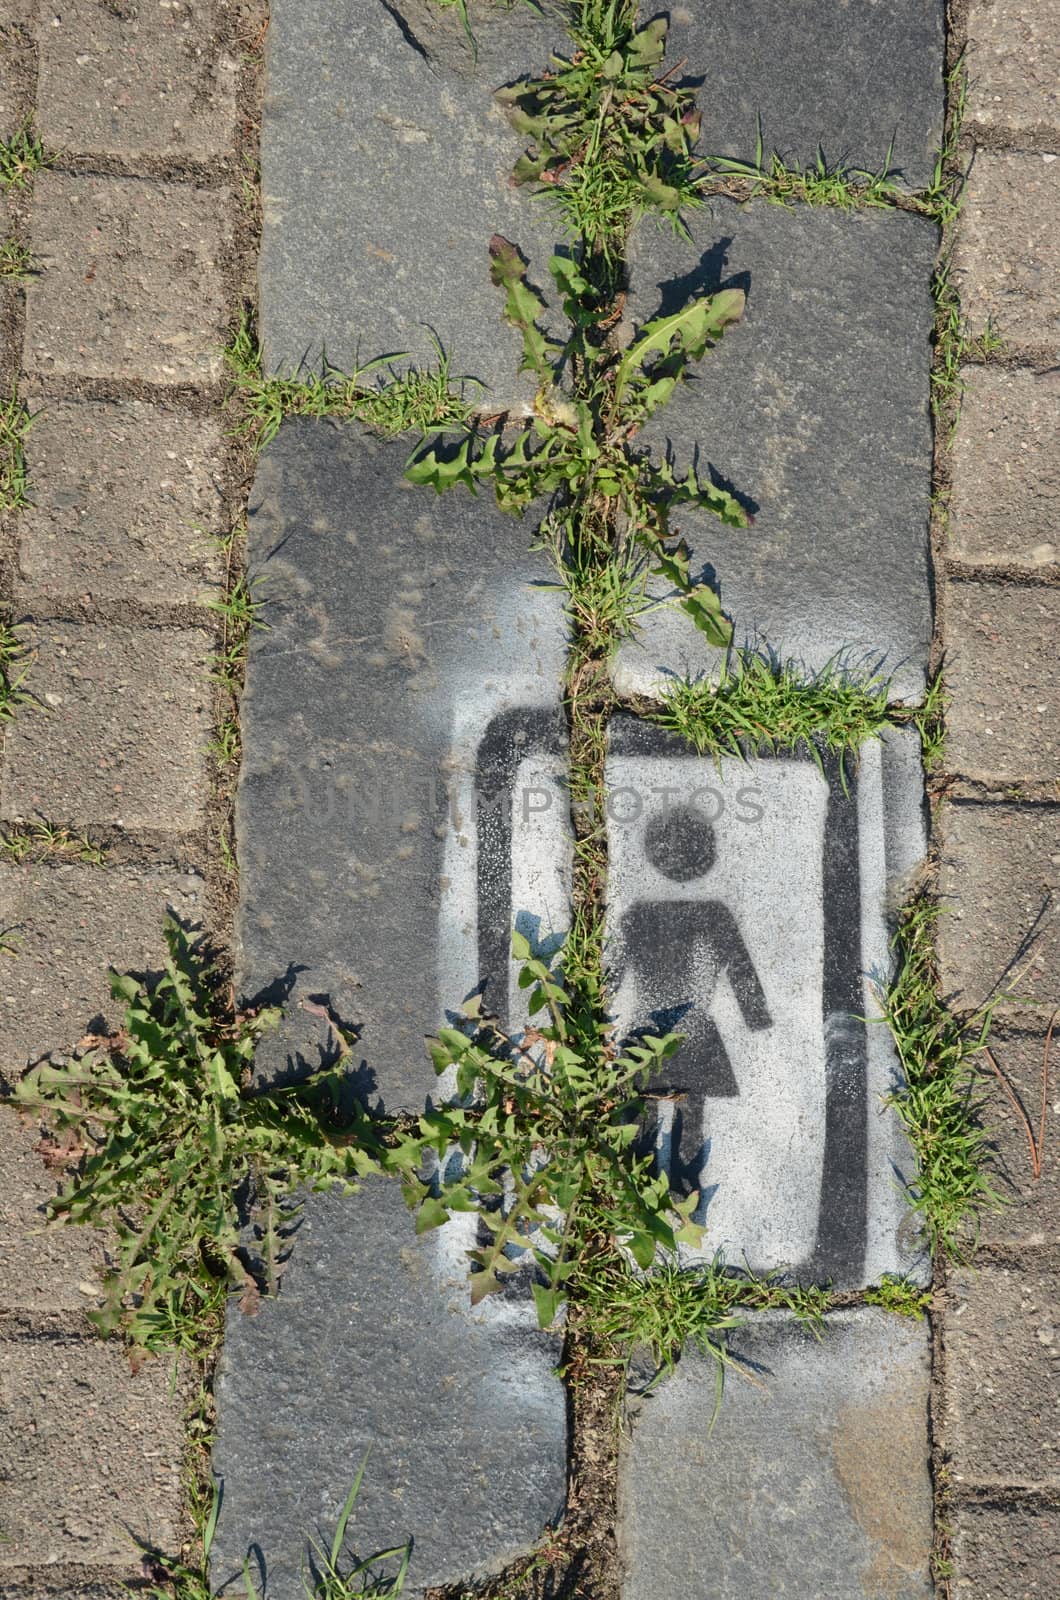 Pavement walkway fragment with weed between bricks and woman sign. Sowthistle leaves.